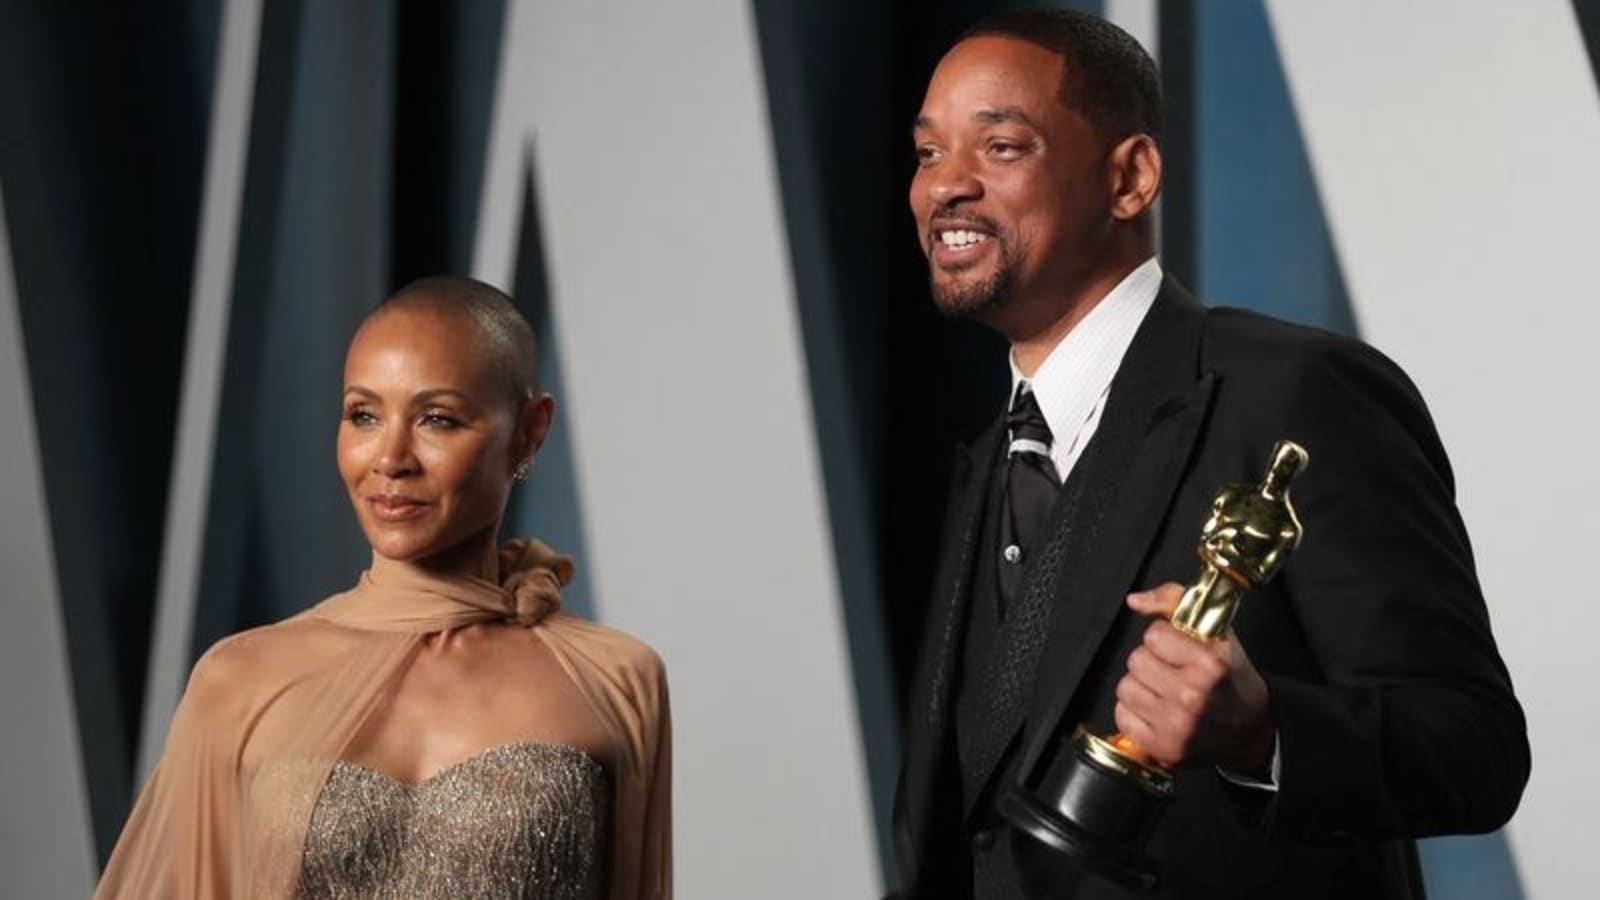 Will Smith, Jada Pinkett Smith seen together in public for 1st time since Oscars Hollywood pic